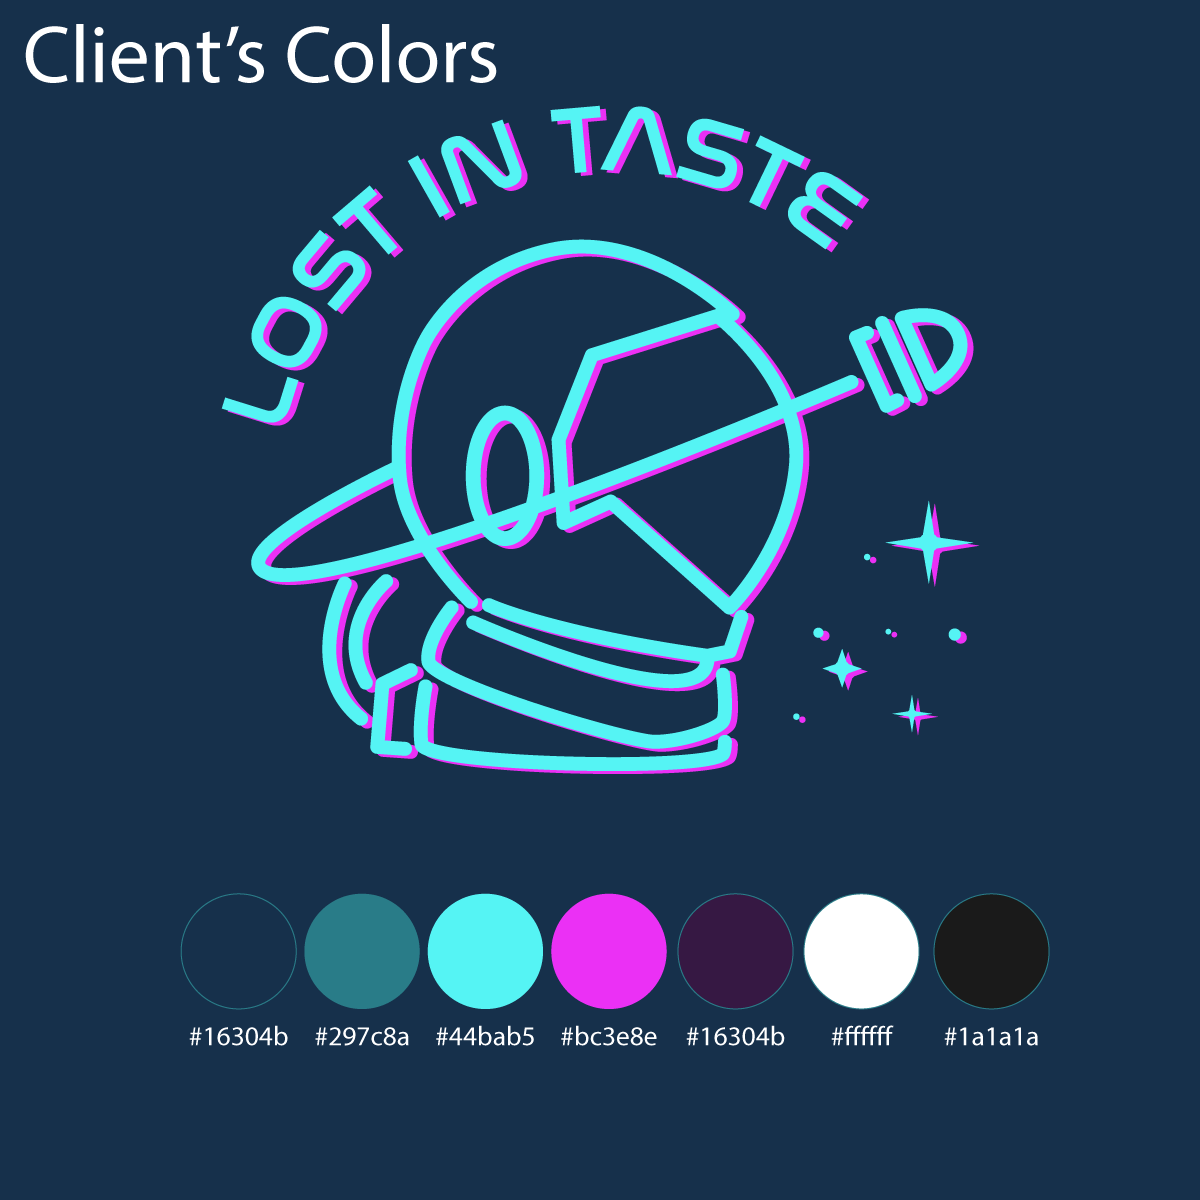 Lost-in-Taste-Clients-Colors.png